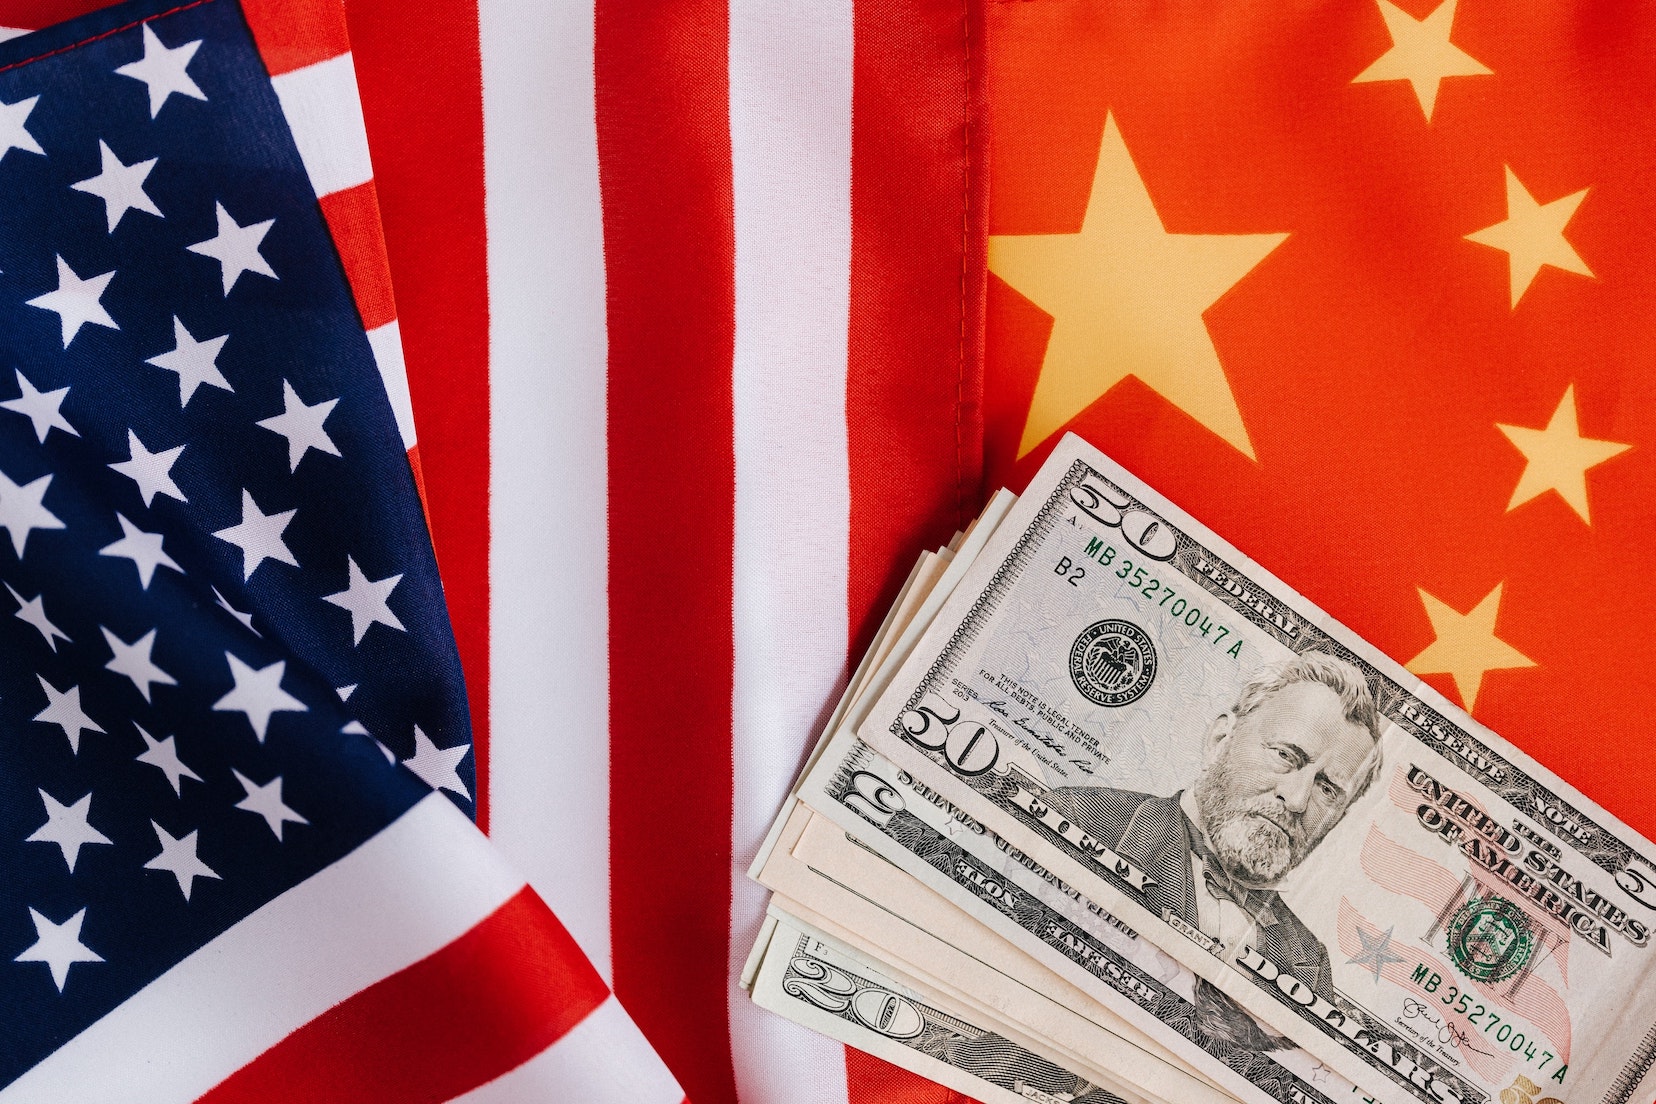 American flag, currency illustration overlapping Chinese flag, via Pexels.